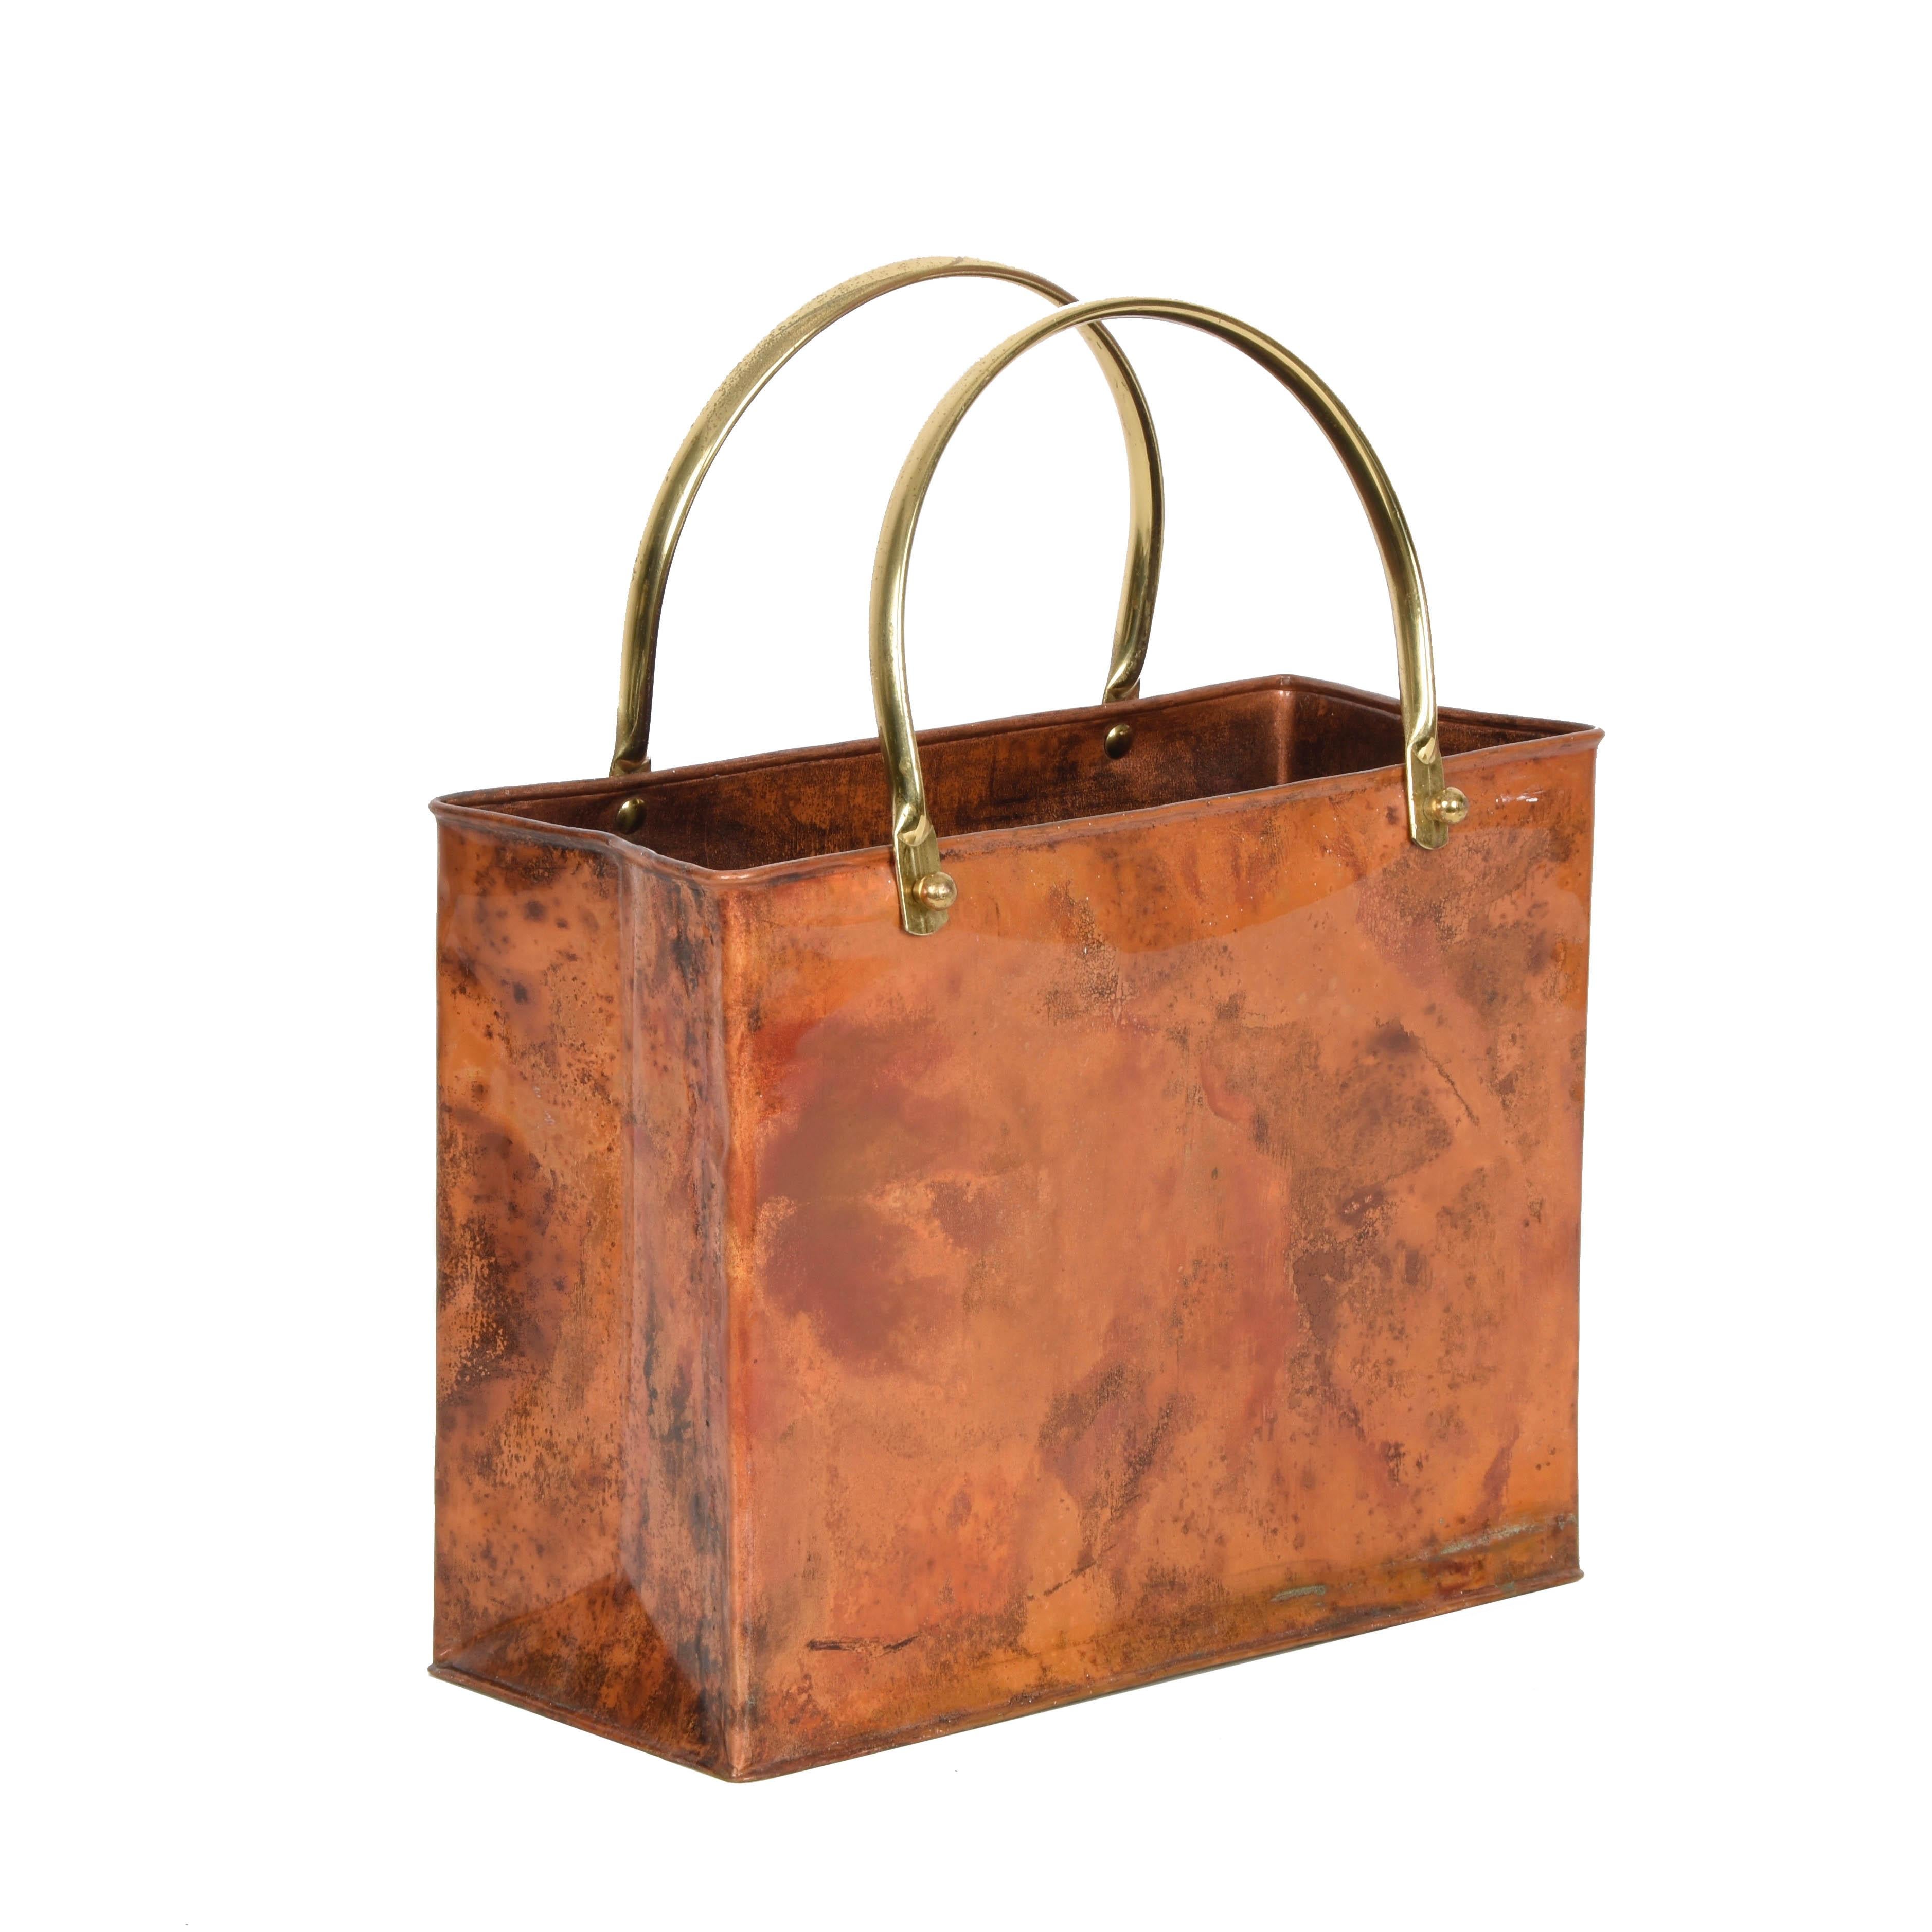 Midcentury enameled copper magazine rack with brass handles. This wonderful piece was designed in Italy during the 1970s.

This item is astonishing because of the contrast between the materials and the shape. In fact, a Classic midcentury shopping